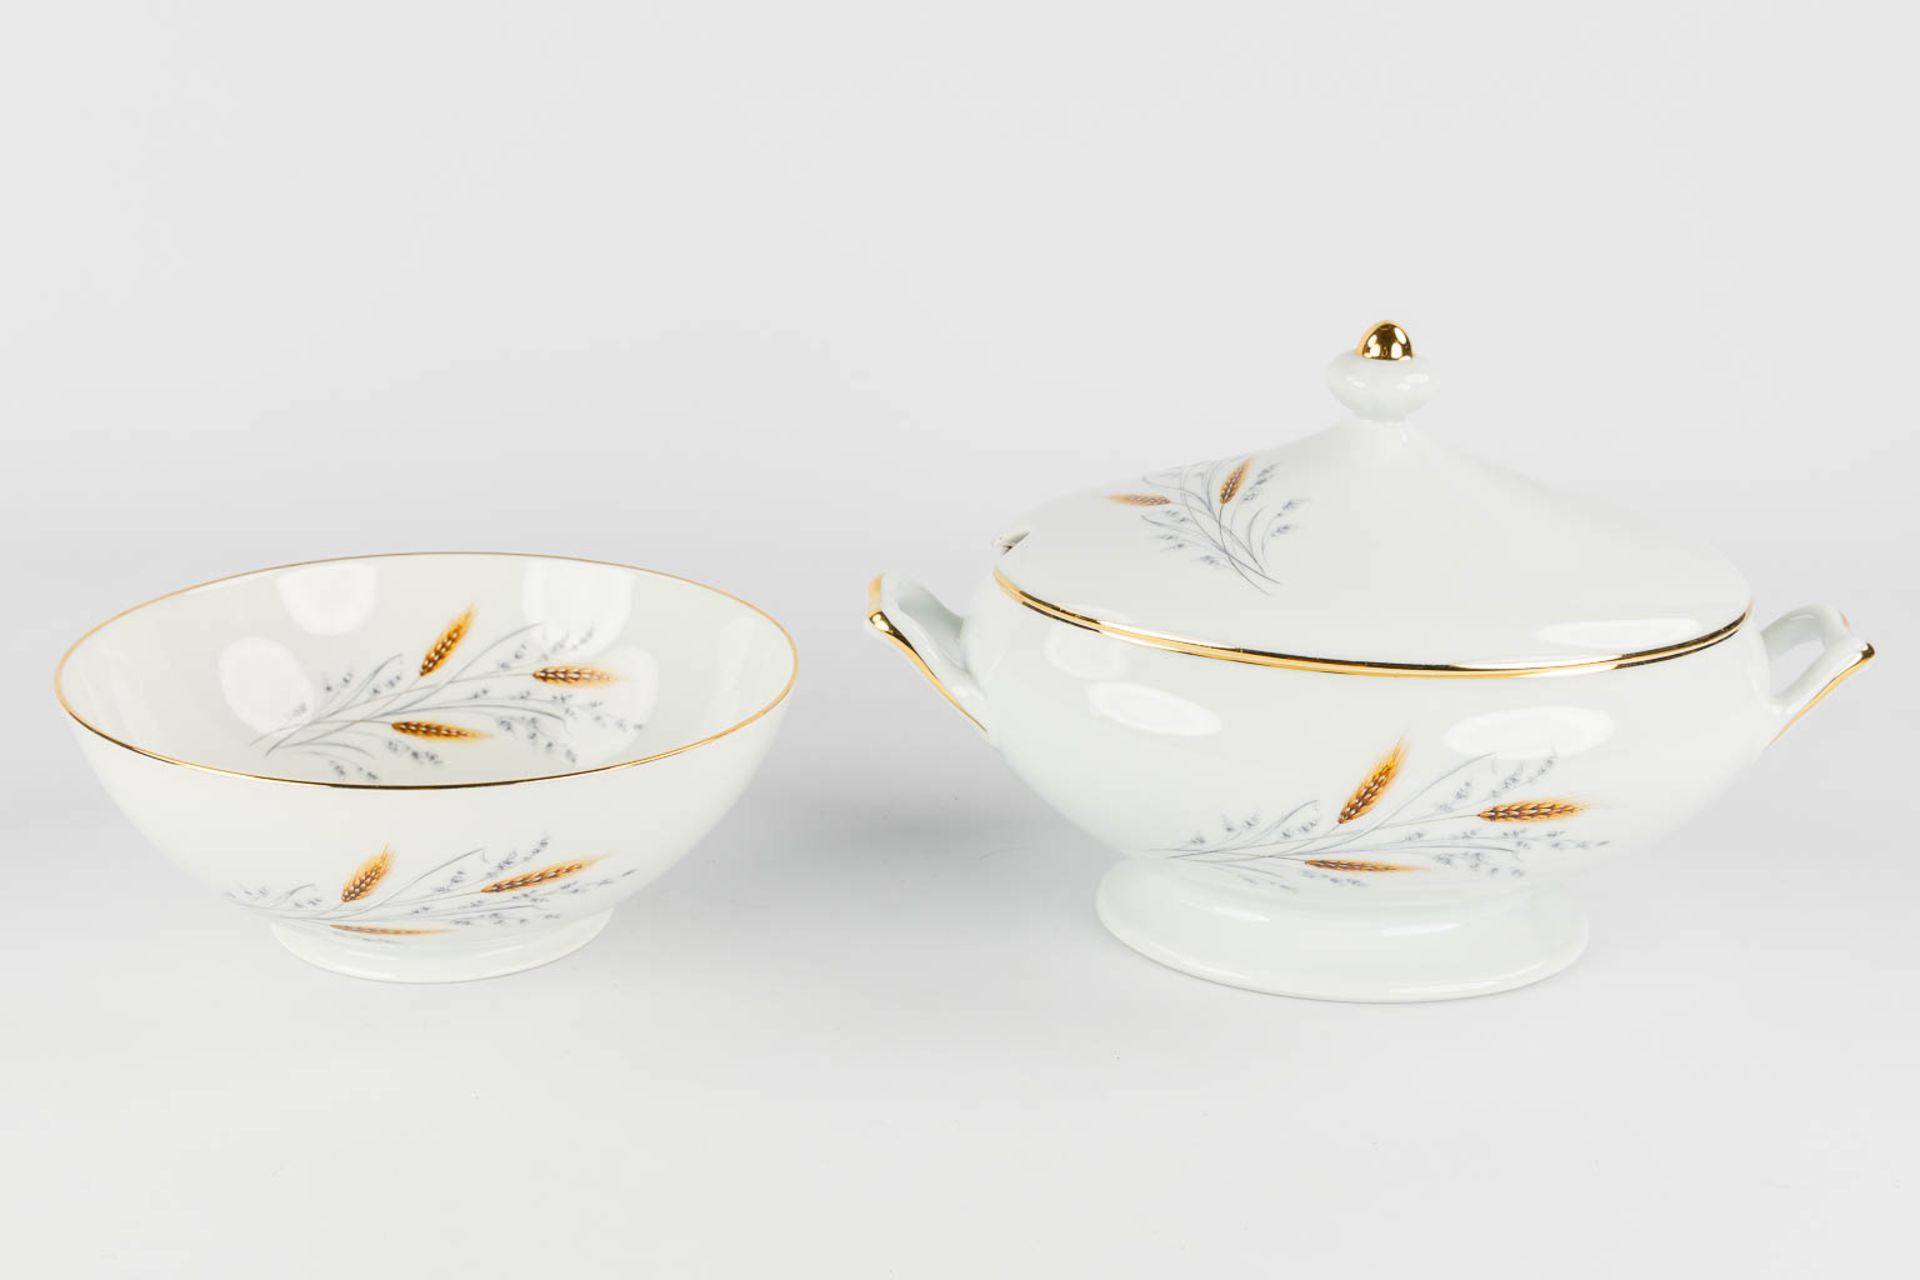 Limoges, France, a large, 12-person dinner, wild and coffee service. (L:23 x W:34 x H:22 cm) - Image 13 of 28